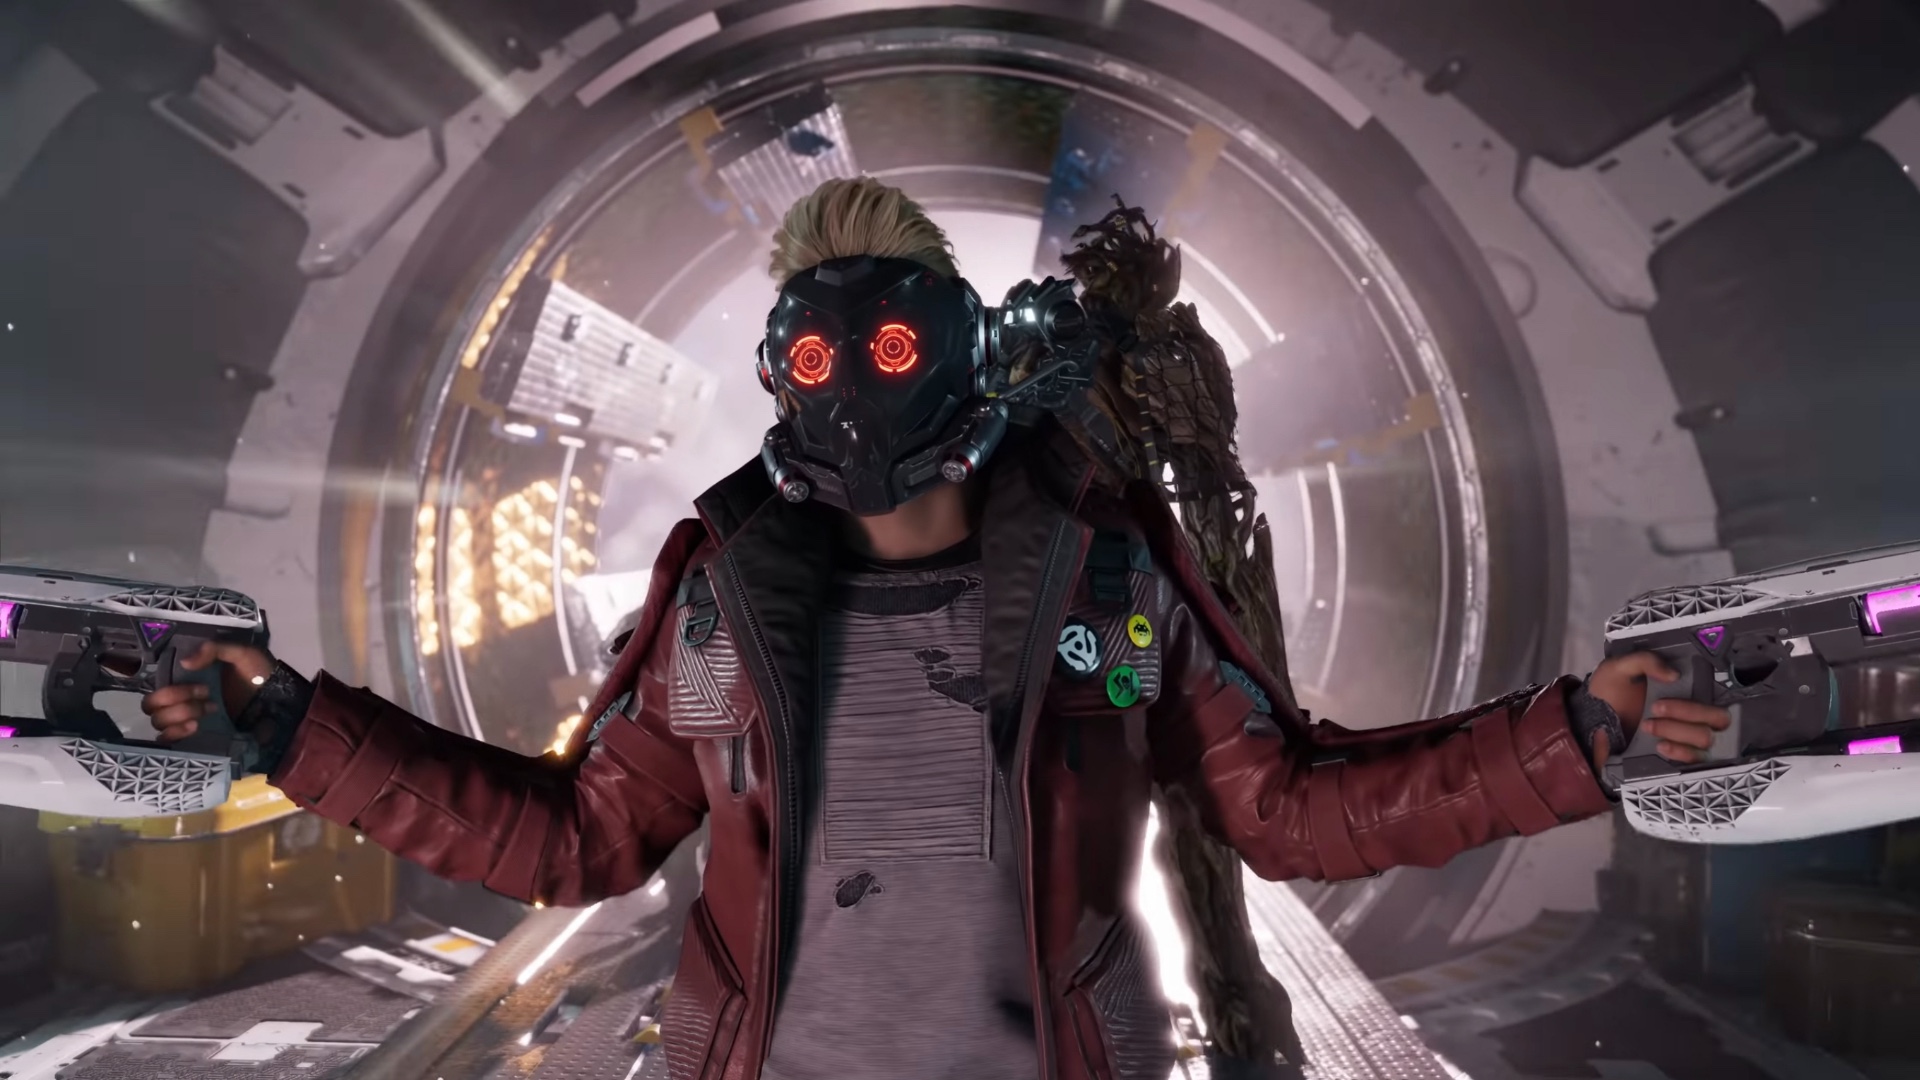 Another Trailer for That Crazy Russian Superhero Movie 'Guardians